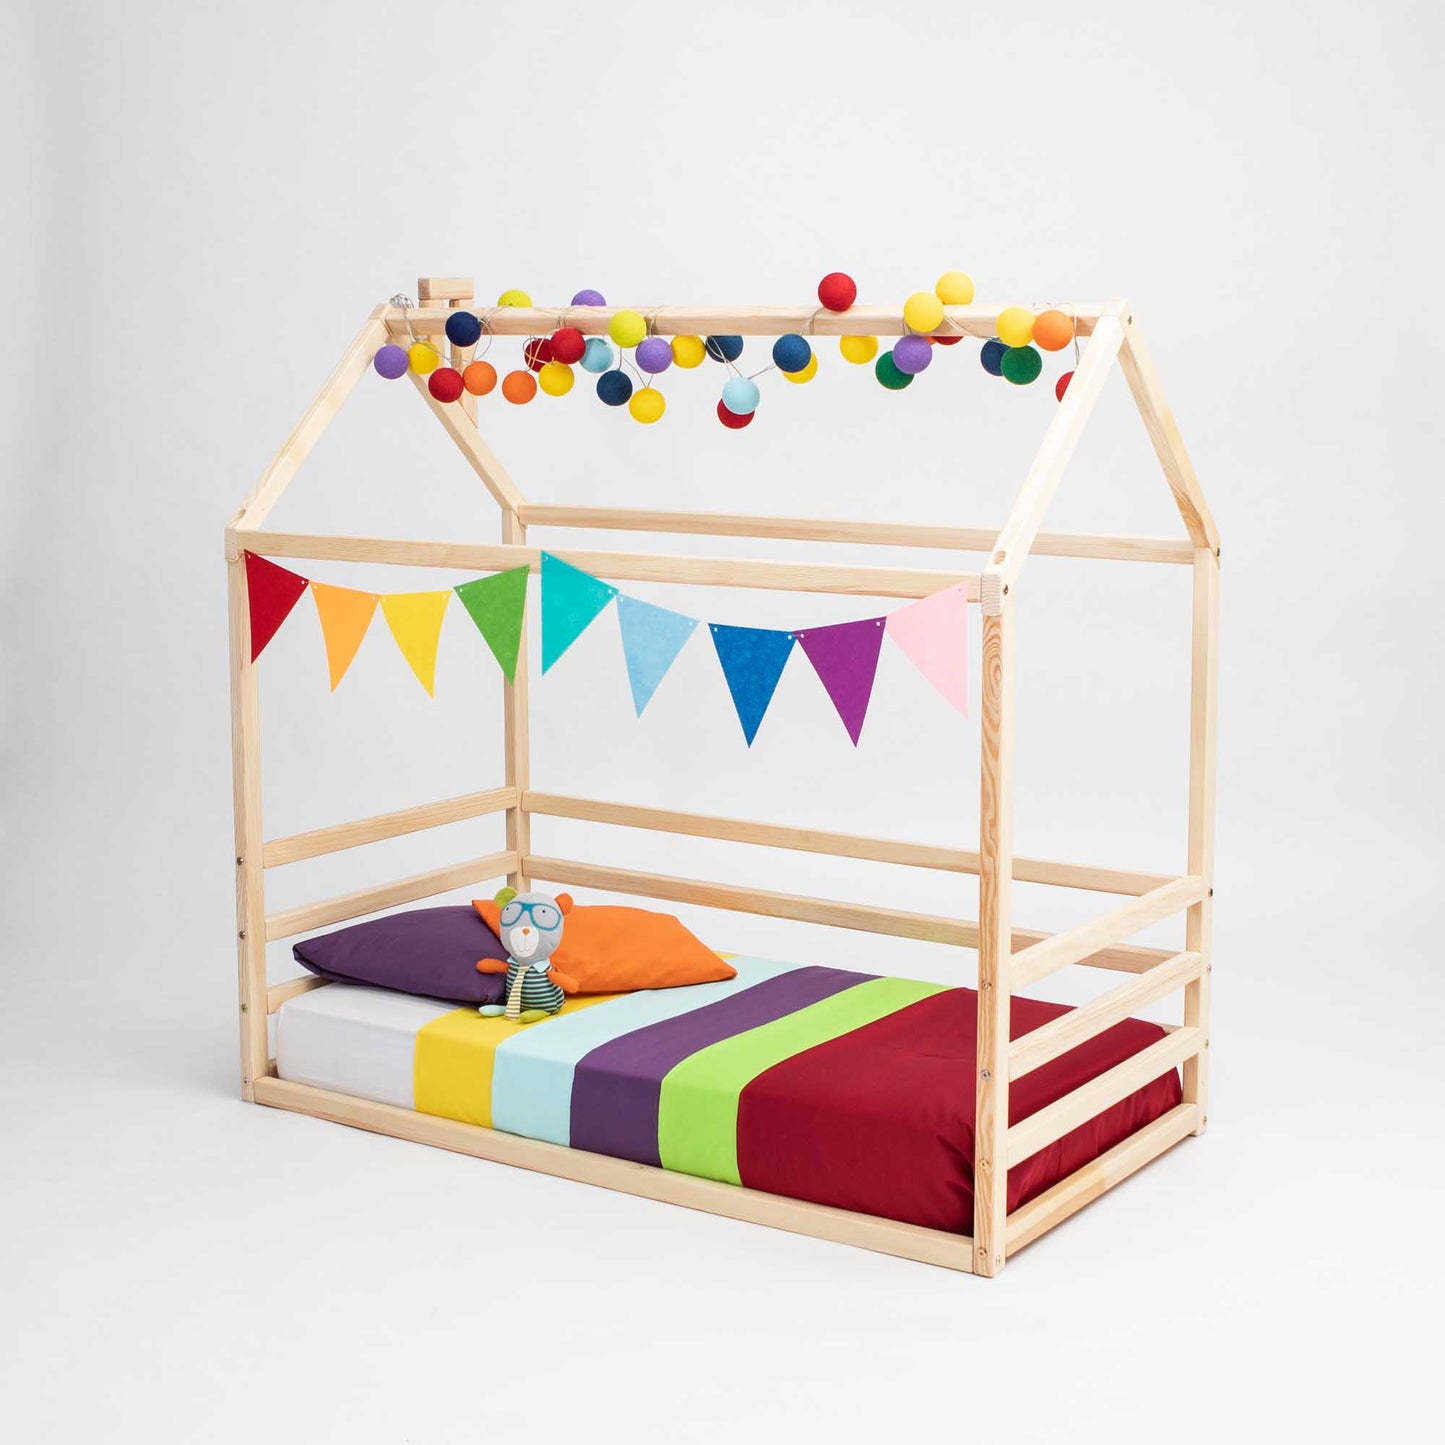 A Kids' house-frame bed with 3-sided horizontal rails features a colorful striped mattress, pillows, a plush toy, triangular pennant banners, and multi-colored pom-pom garlands.